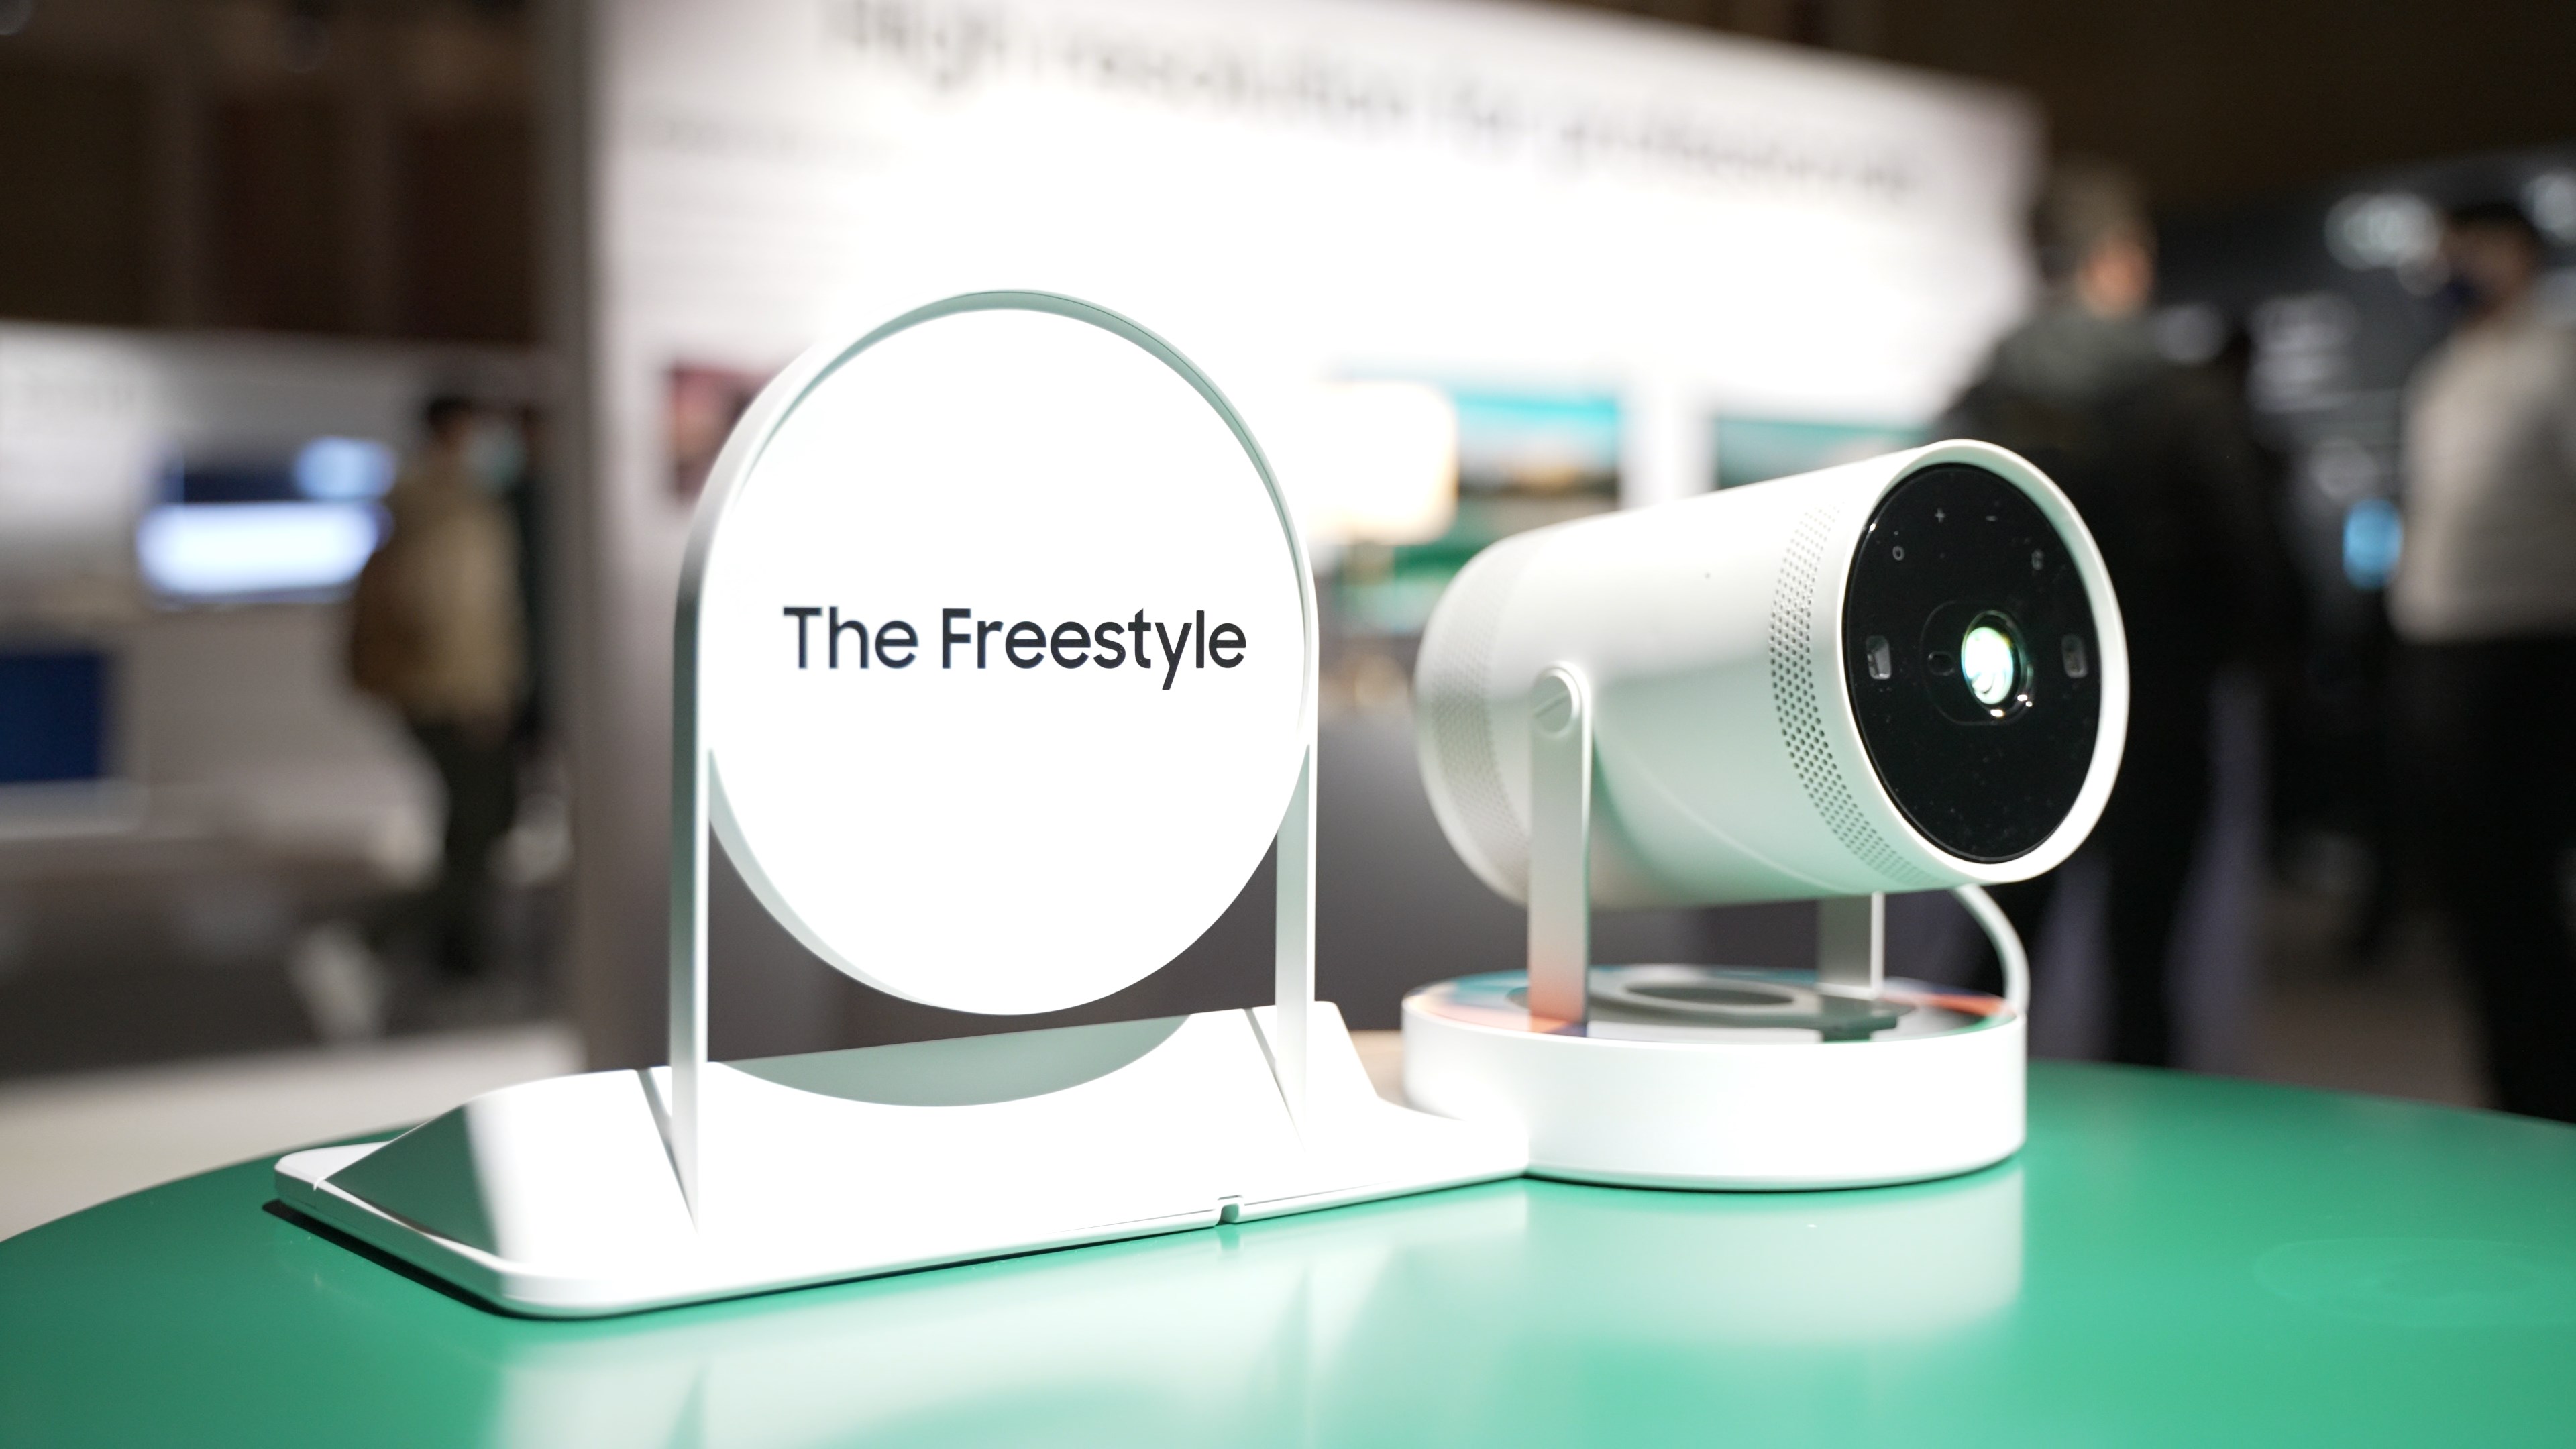 Samsung's portable projector, the Freestyle.